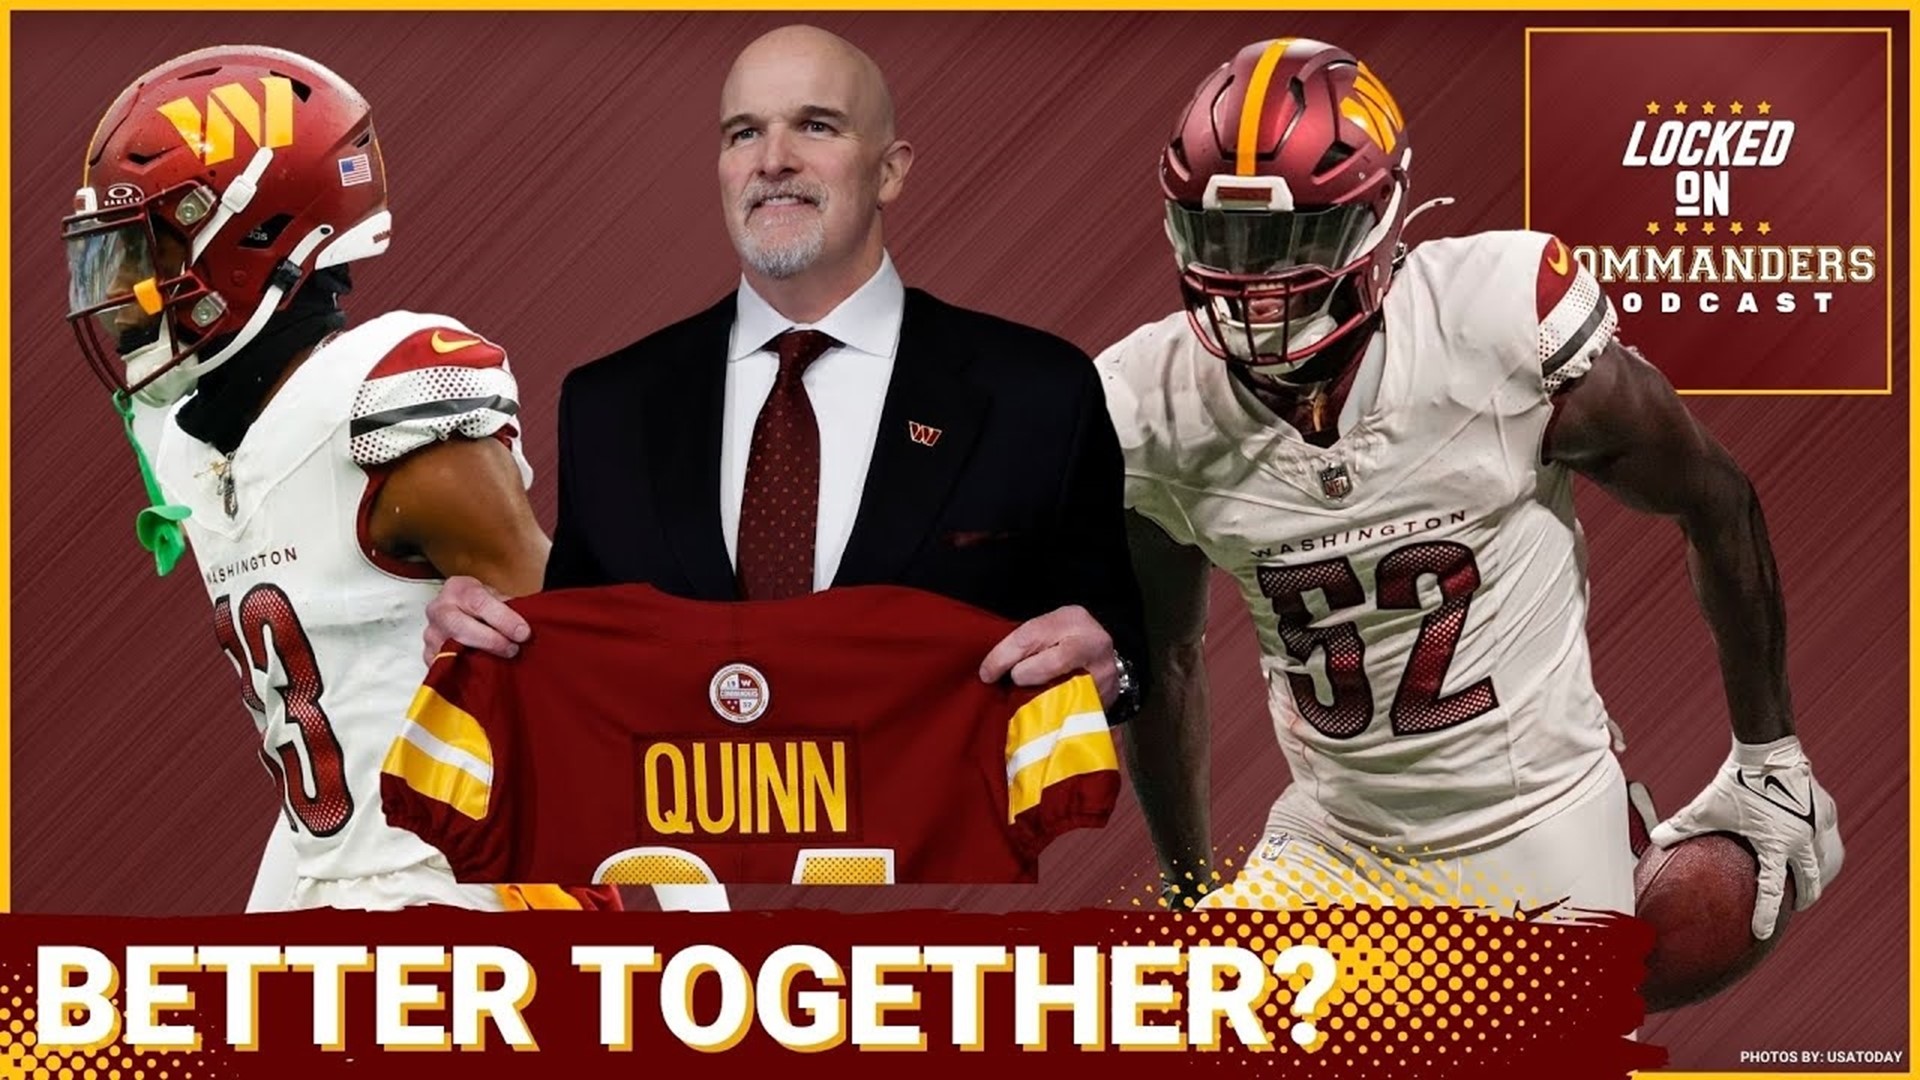 Part 2 of our conversation with Washington Commanders coach Dan Quinn as he discusses Emmanuel Forbes, Jamin Davis, and more!